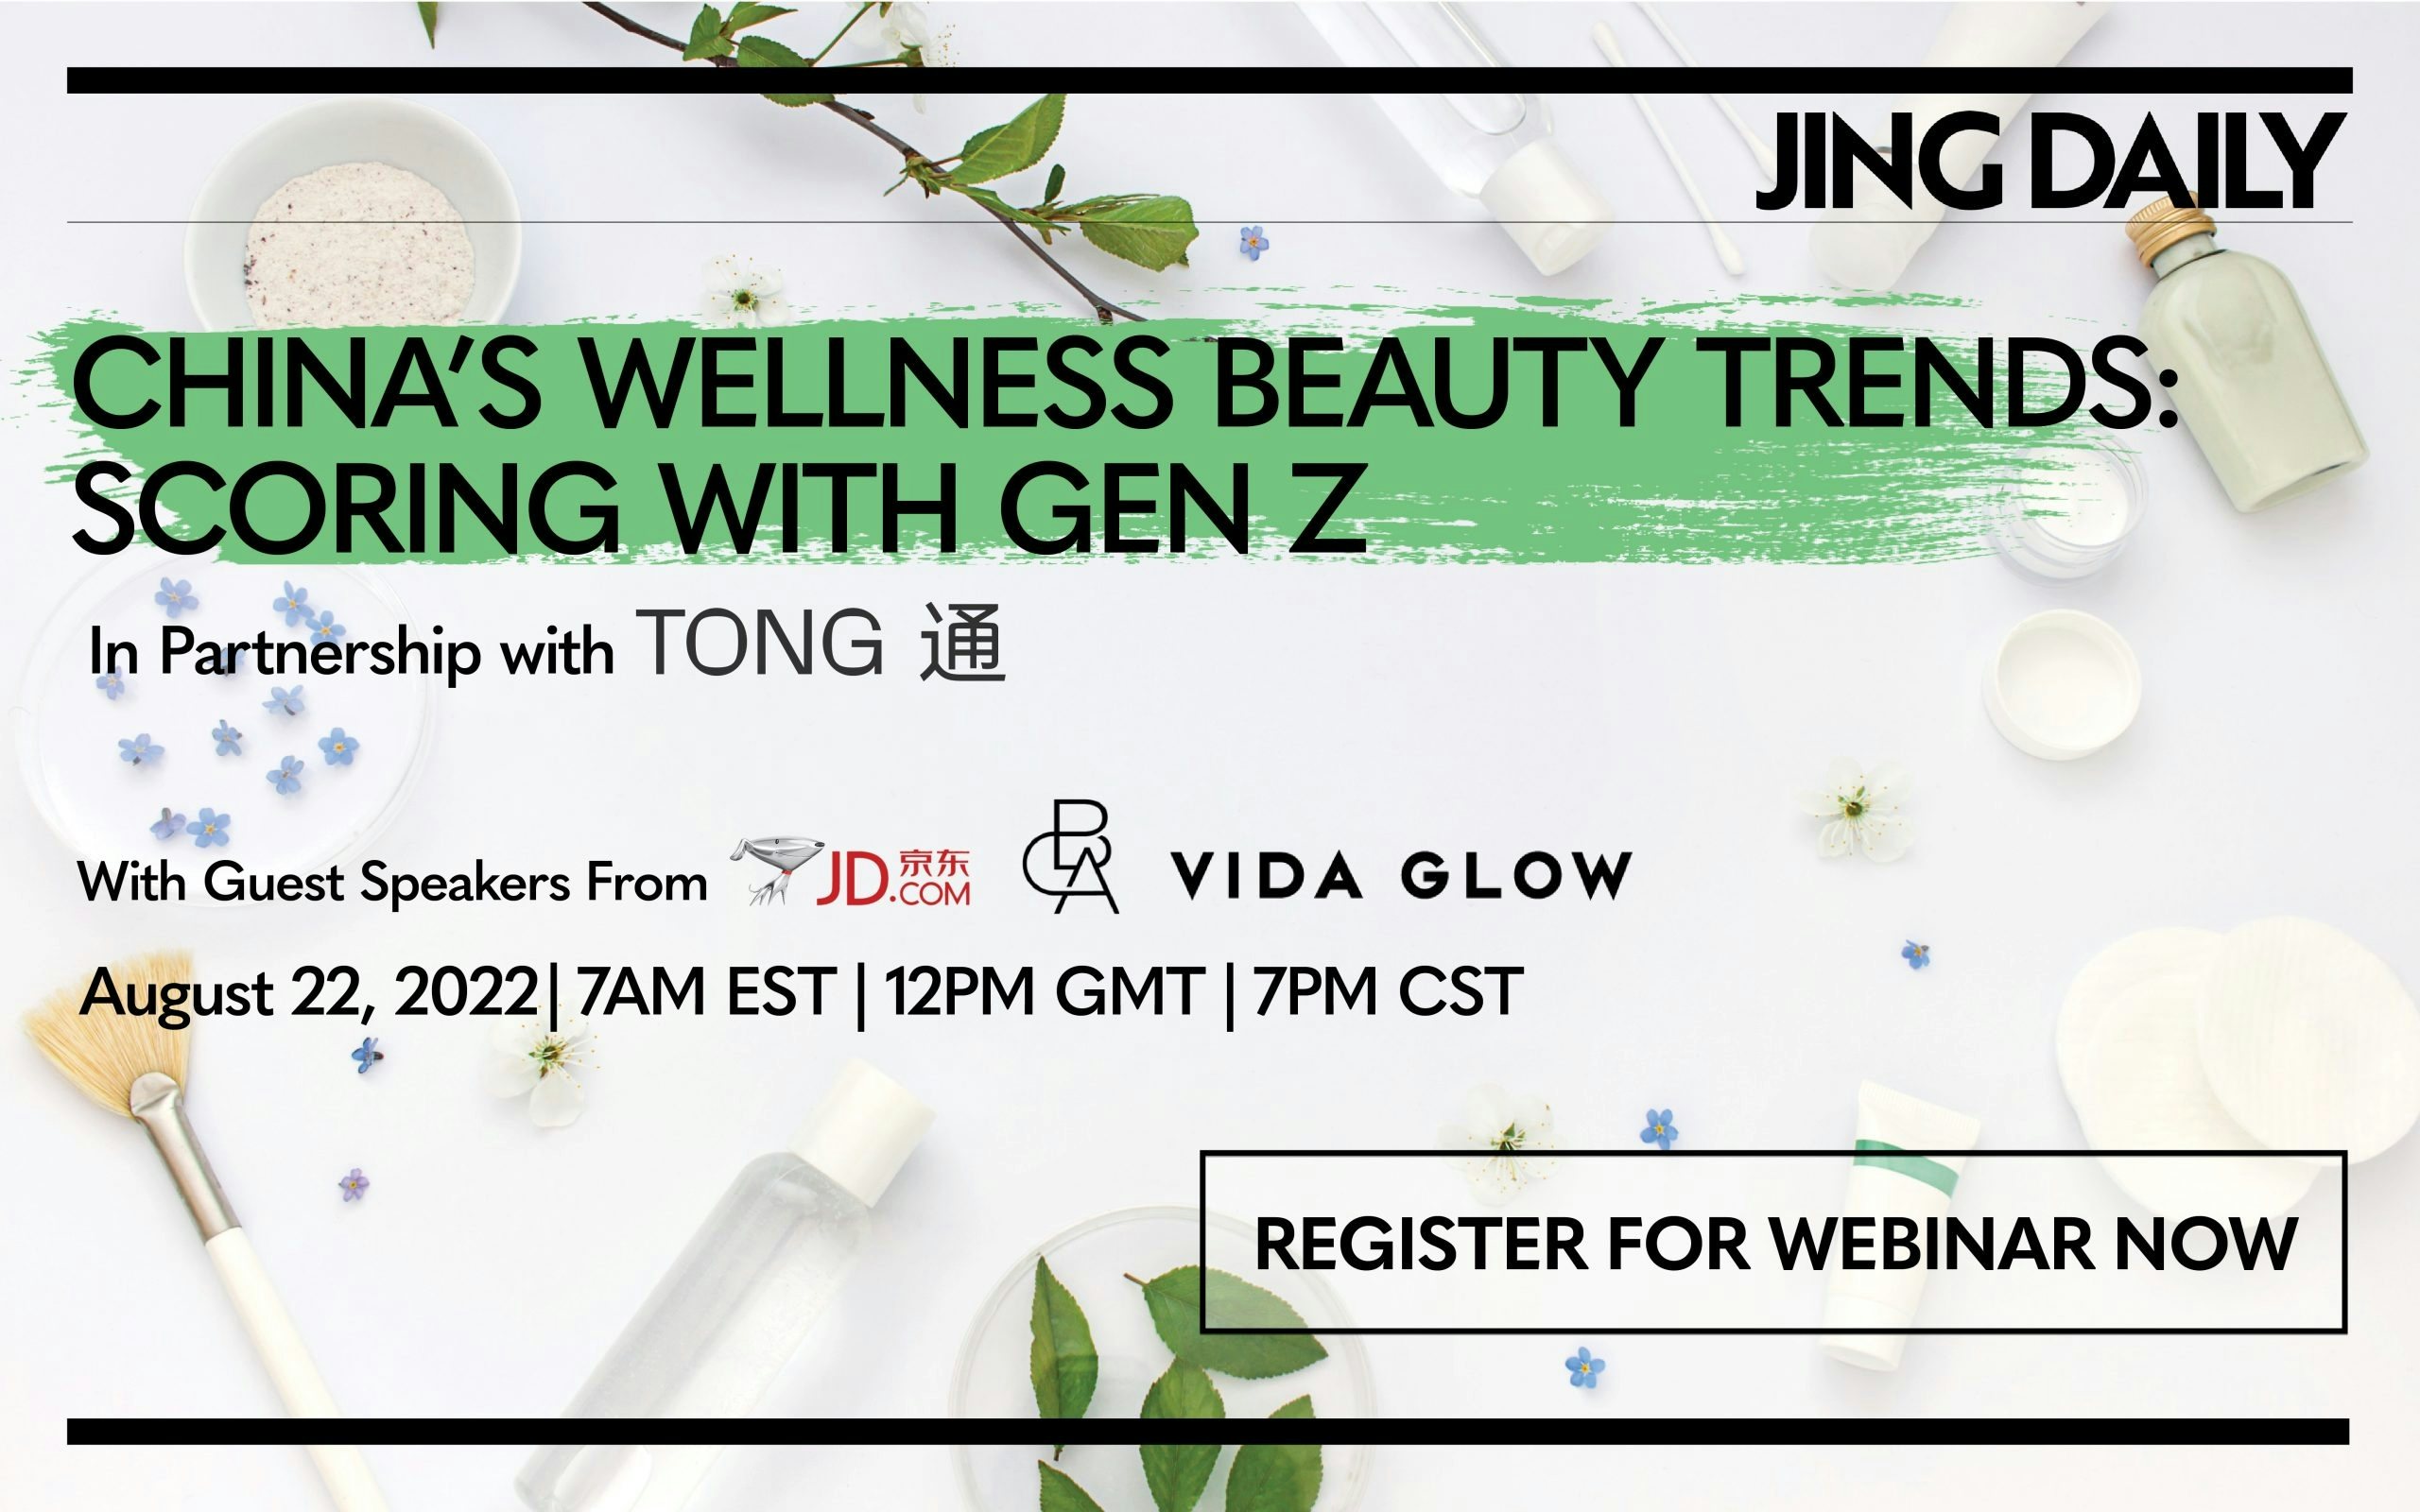 Join Jing Daily’s expert panel for a deep dive into China’s wellness beauty trends on Monday, August 22, sponsored by marketing agency Tong. 